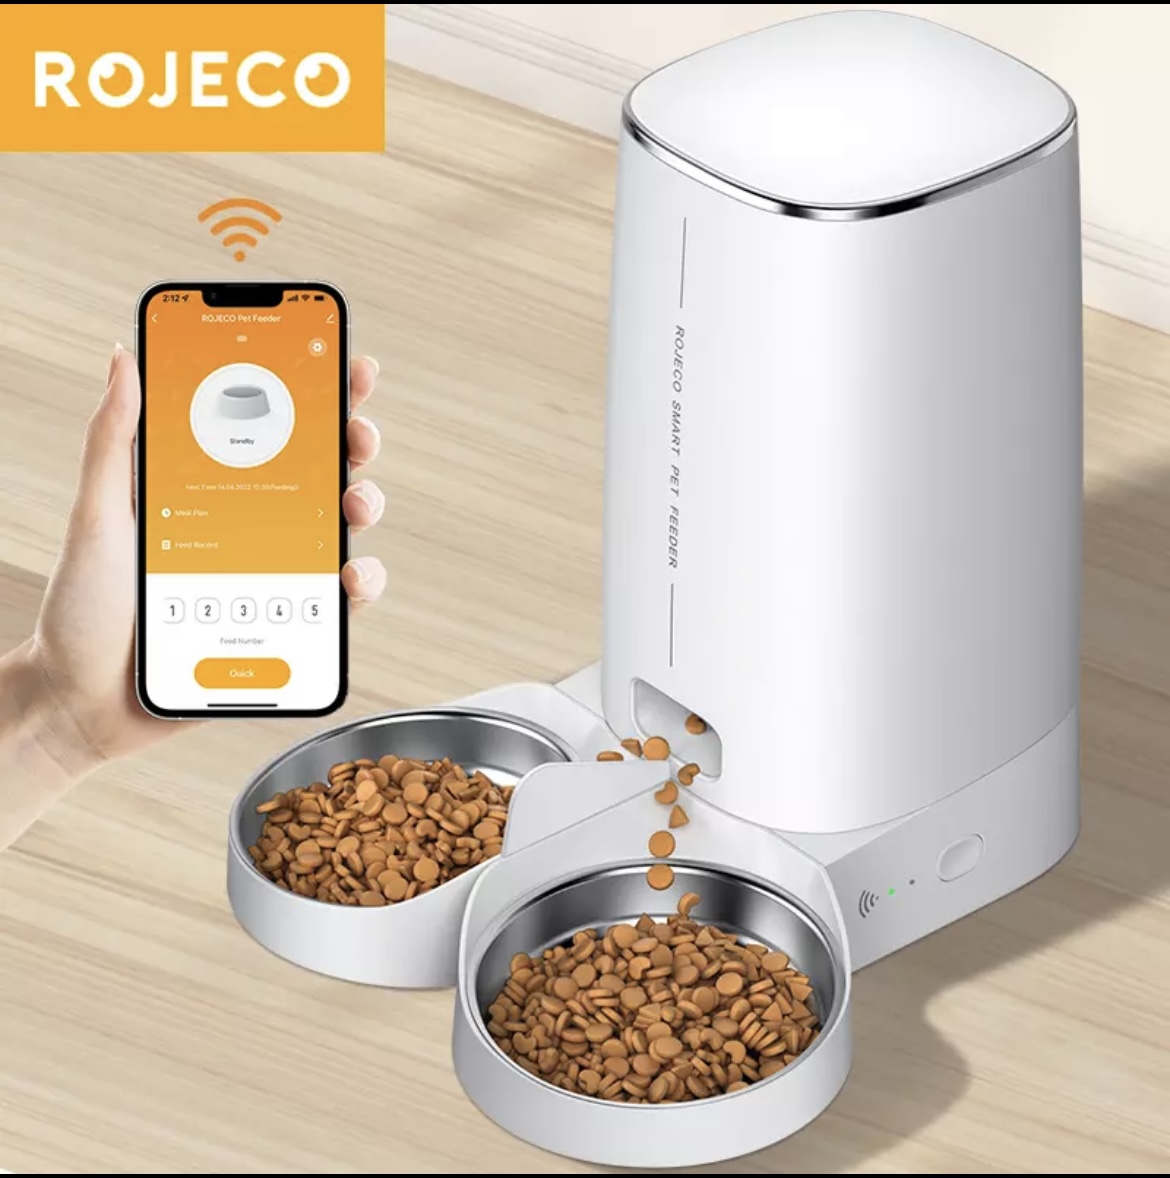 Original ROJECO 4L Automatic Pet Feeder Cat Food Dispenser Accessories Remote Control Pet Smart WiFi Auto Feeder For Cats Dogs Dry Food